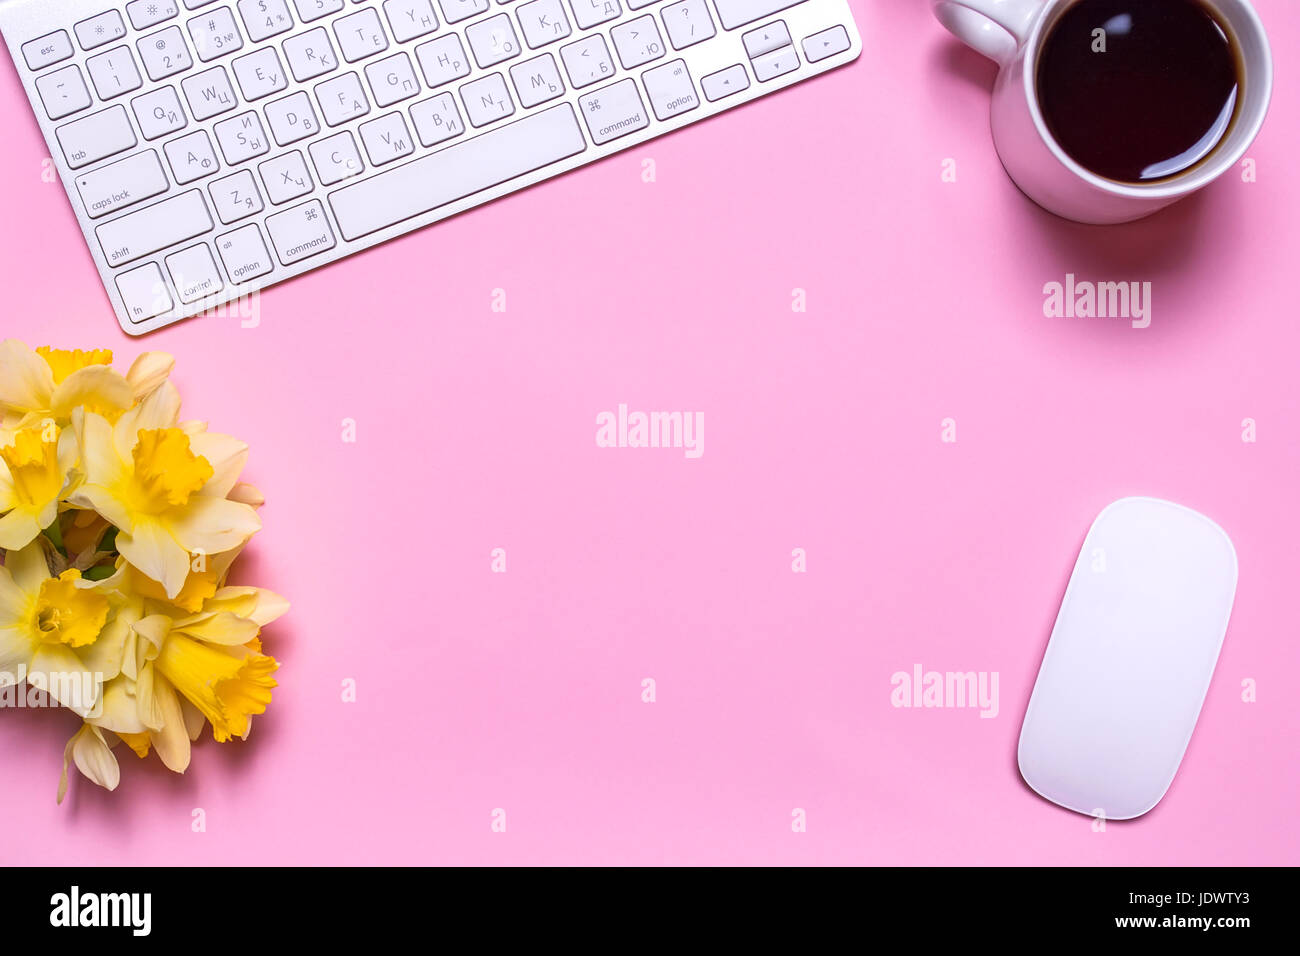 Office workplace with keyboard, a bouquet of daffodils, a cup of tea and a computer mouse on a pink background. Flat lay design, top view. Stock Photo